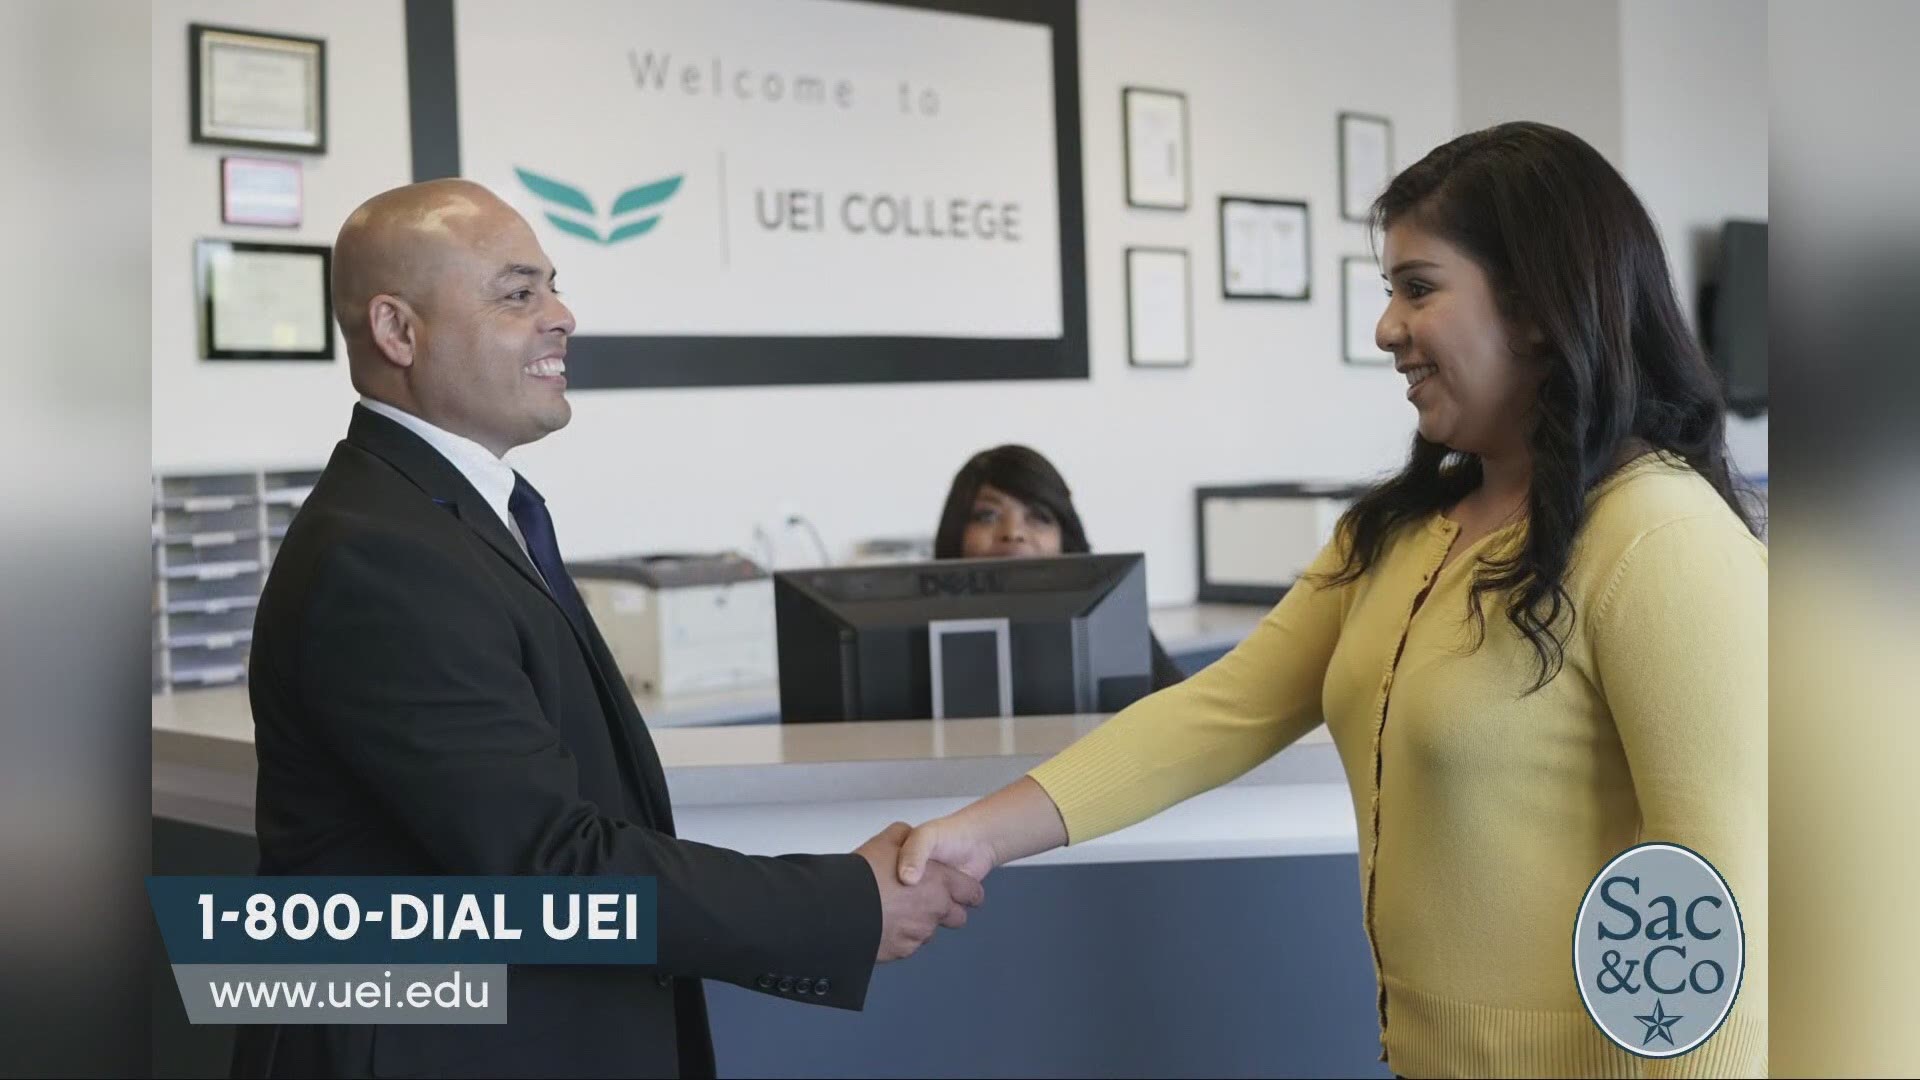 UEI College is coming to Sacramento! Learn how you can get career training that will help you create a future you can be proud of! The following is a paid segment sponsored by UEI.